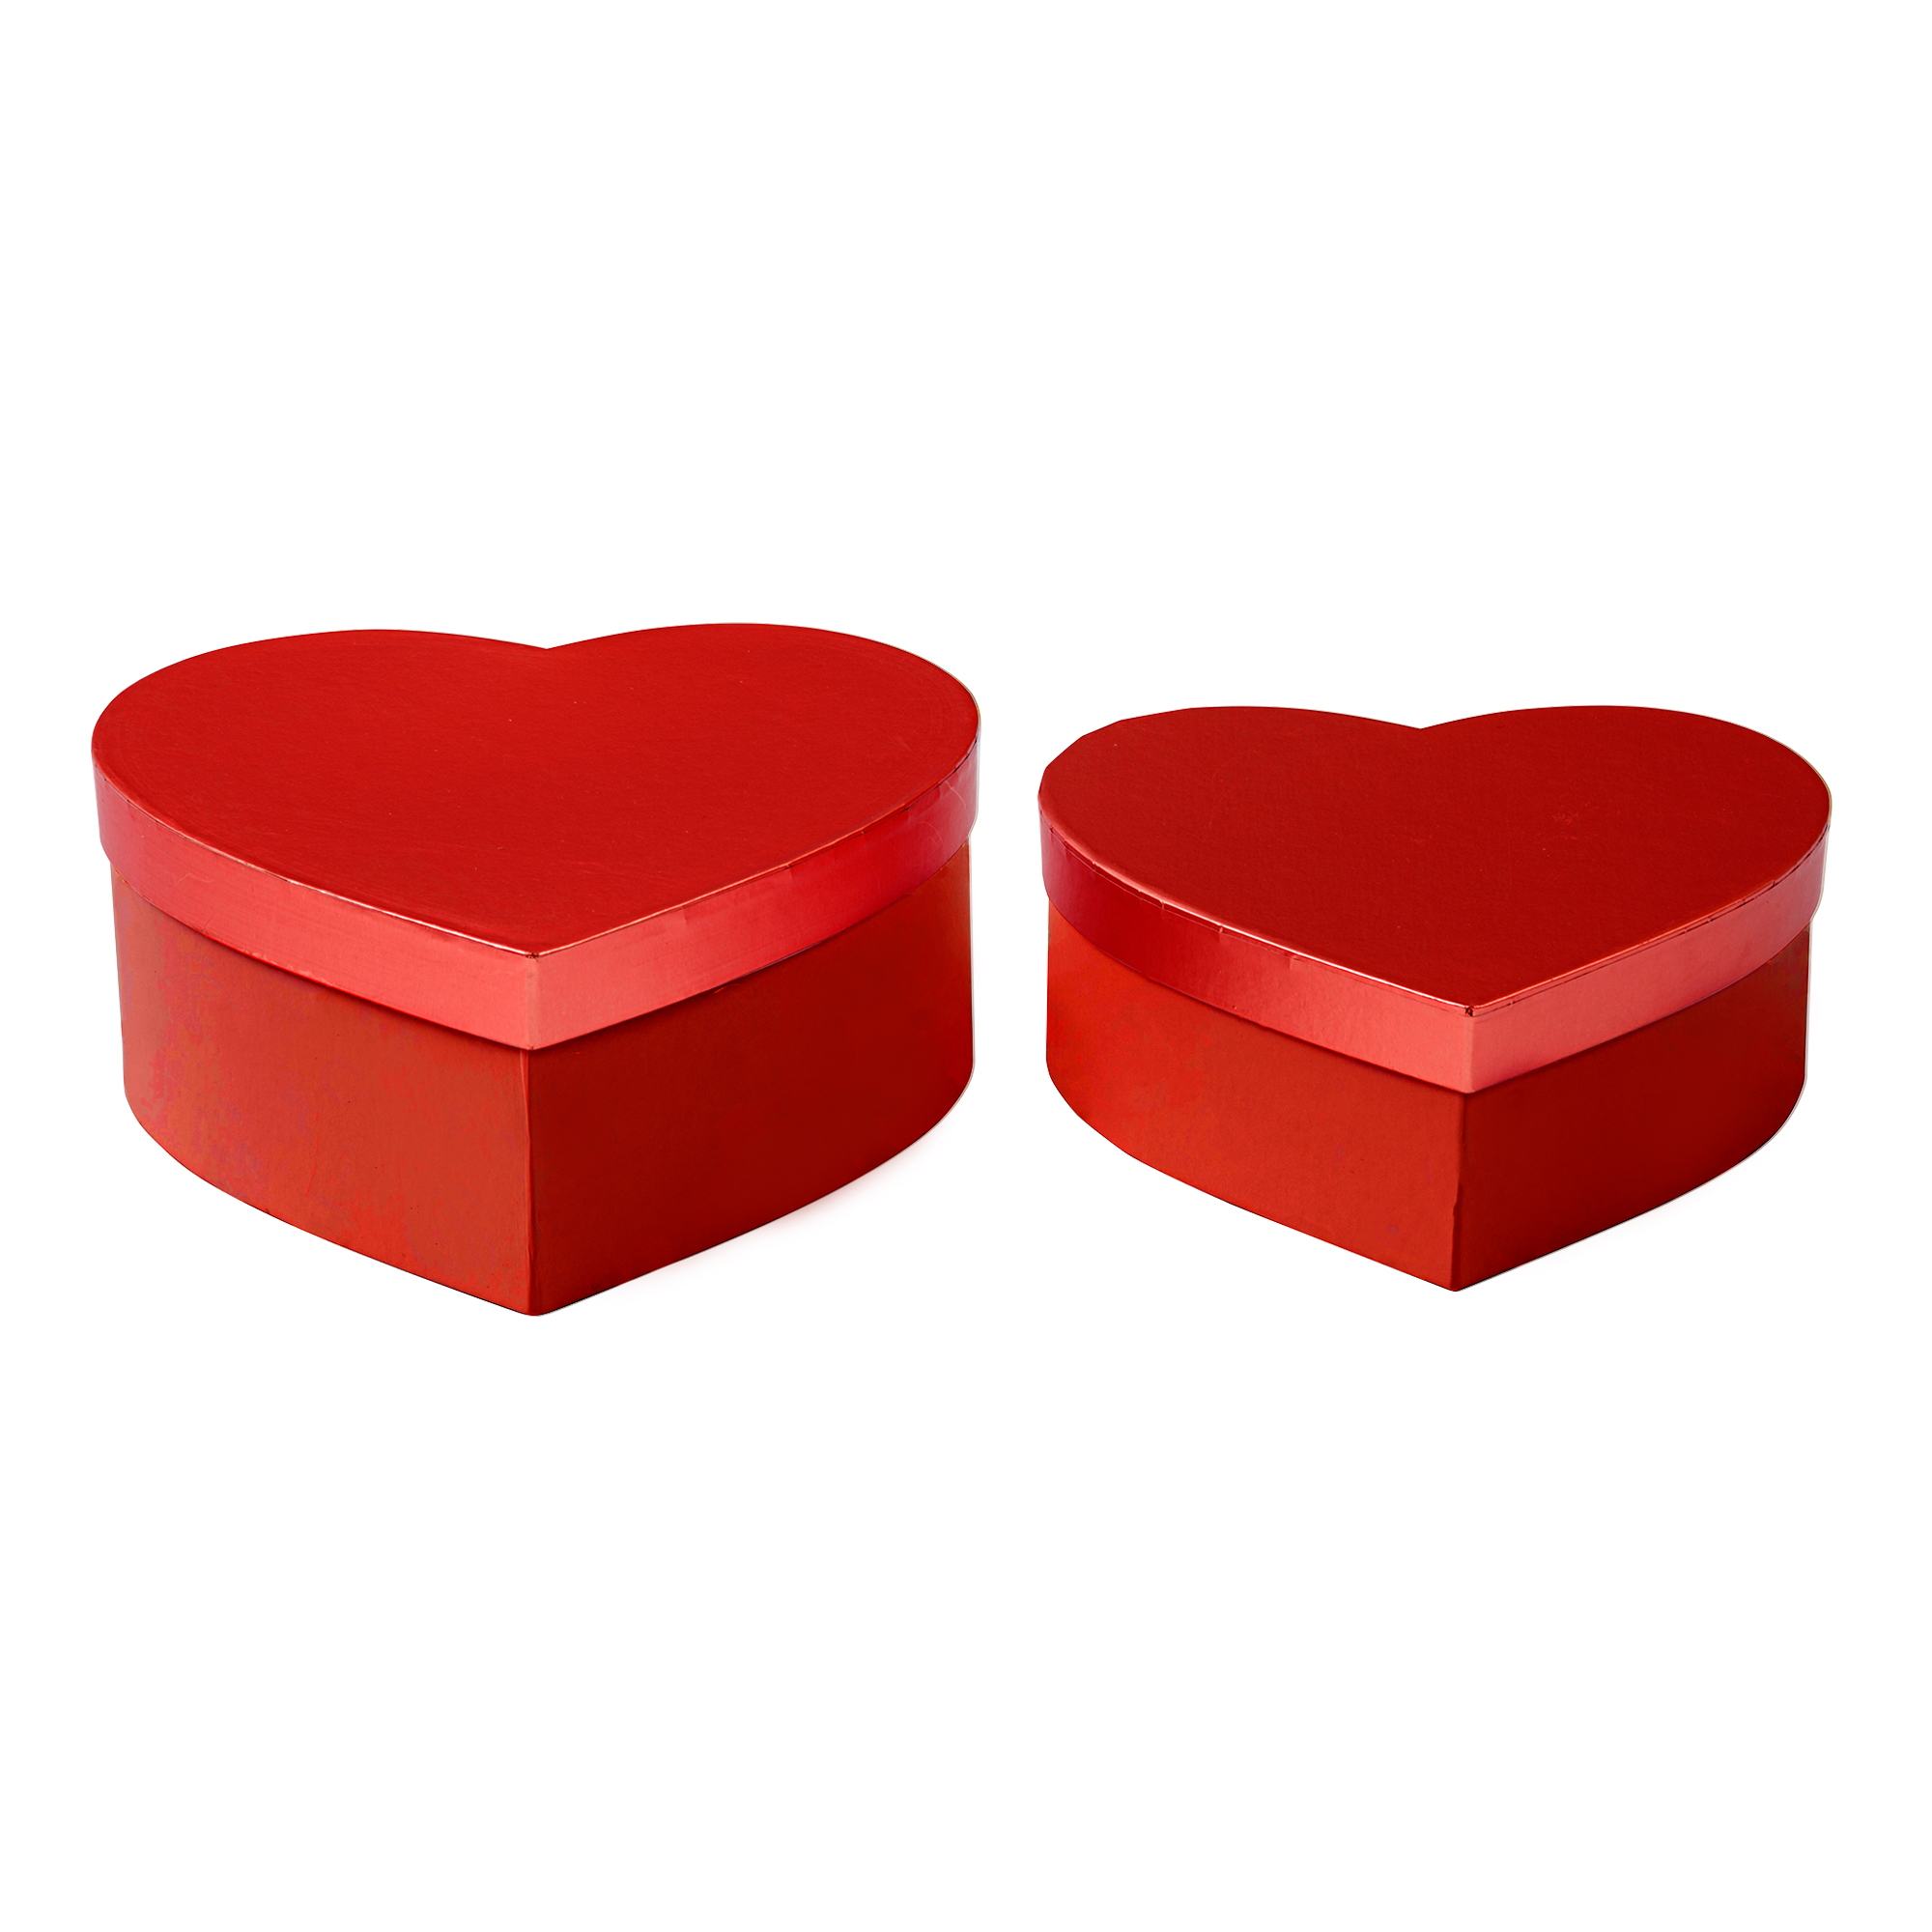 Nested Heart Floral Boxes 2pc/set - All Red